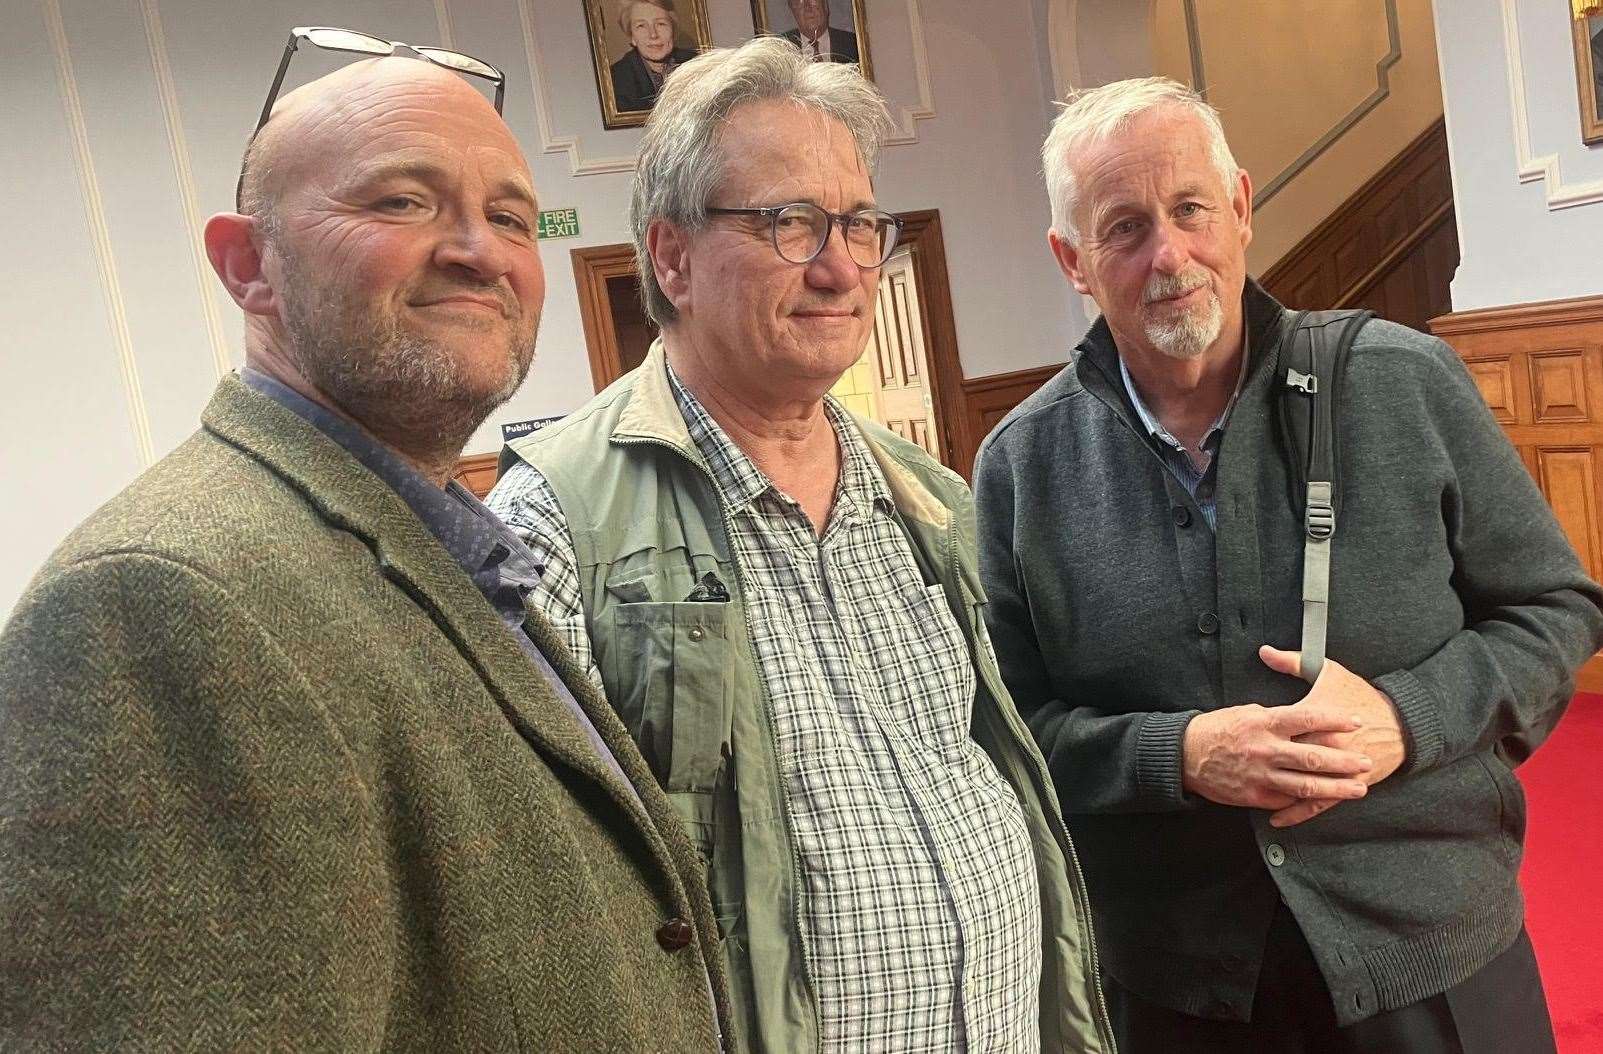 Save Folkestone Library campaigners, from left, Bryan Rylands, Jon O'Connor and Matthew Jones. Picture: Simon Finlay